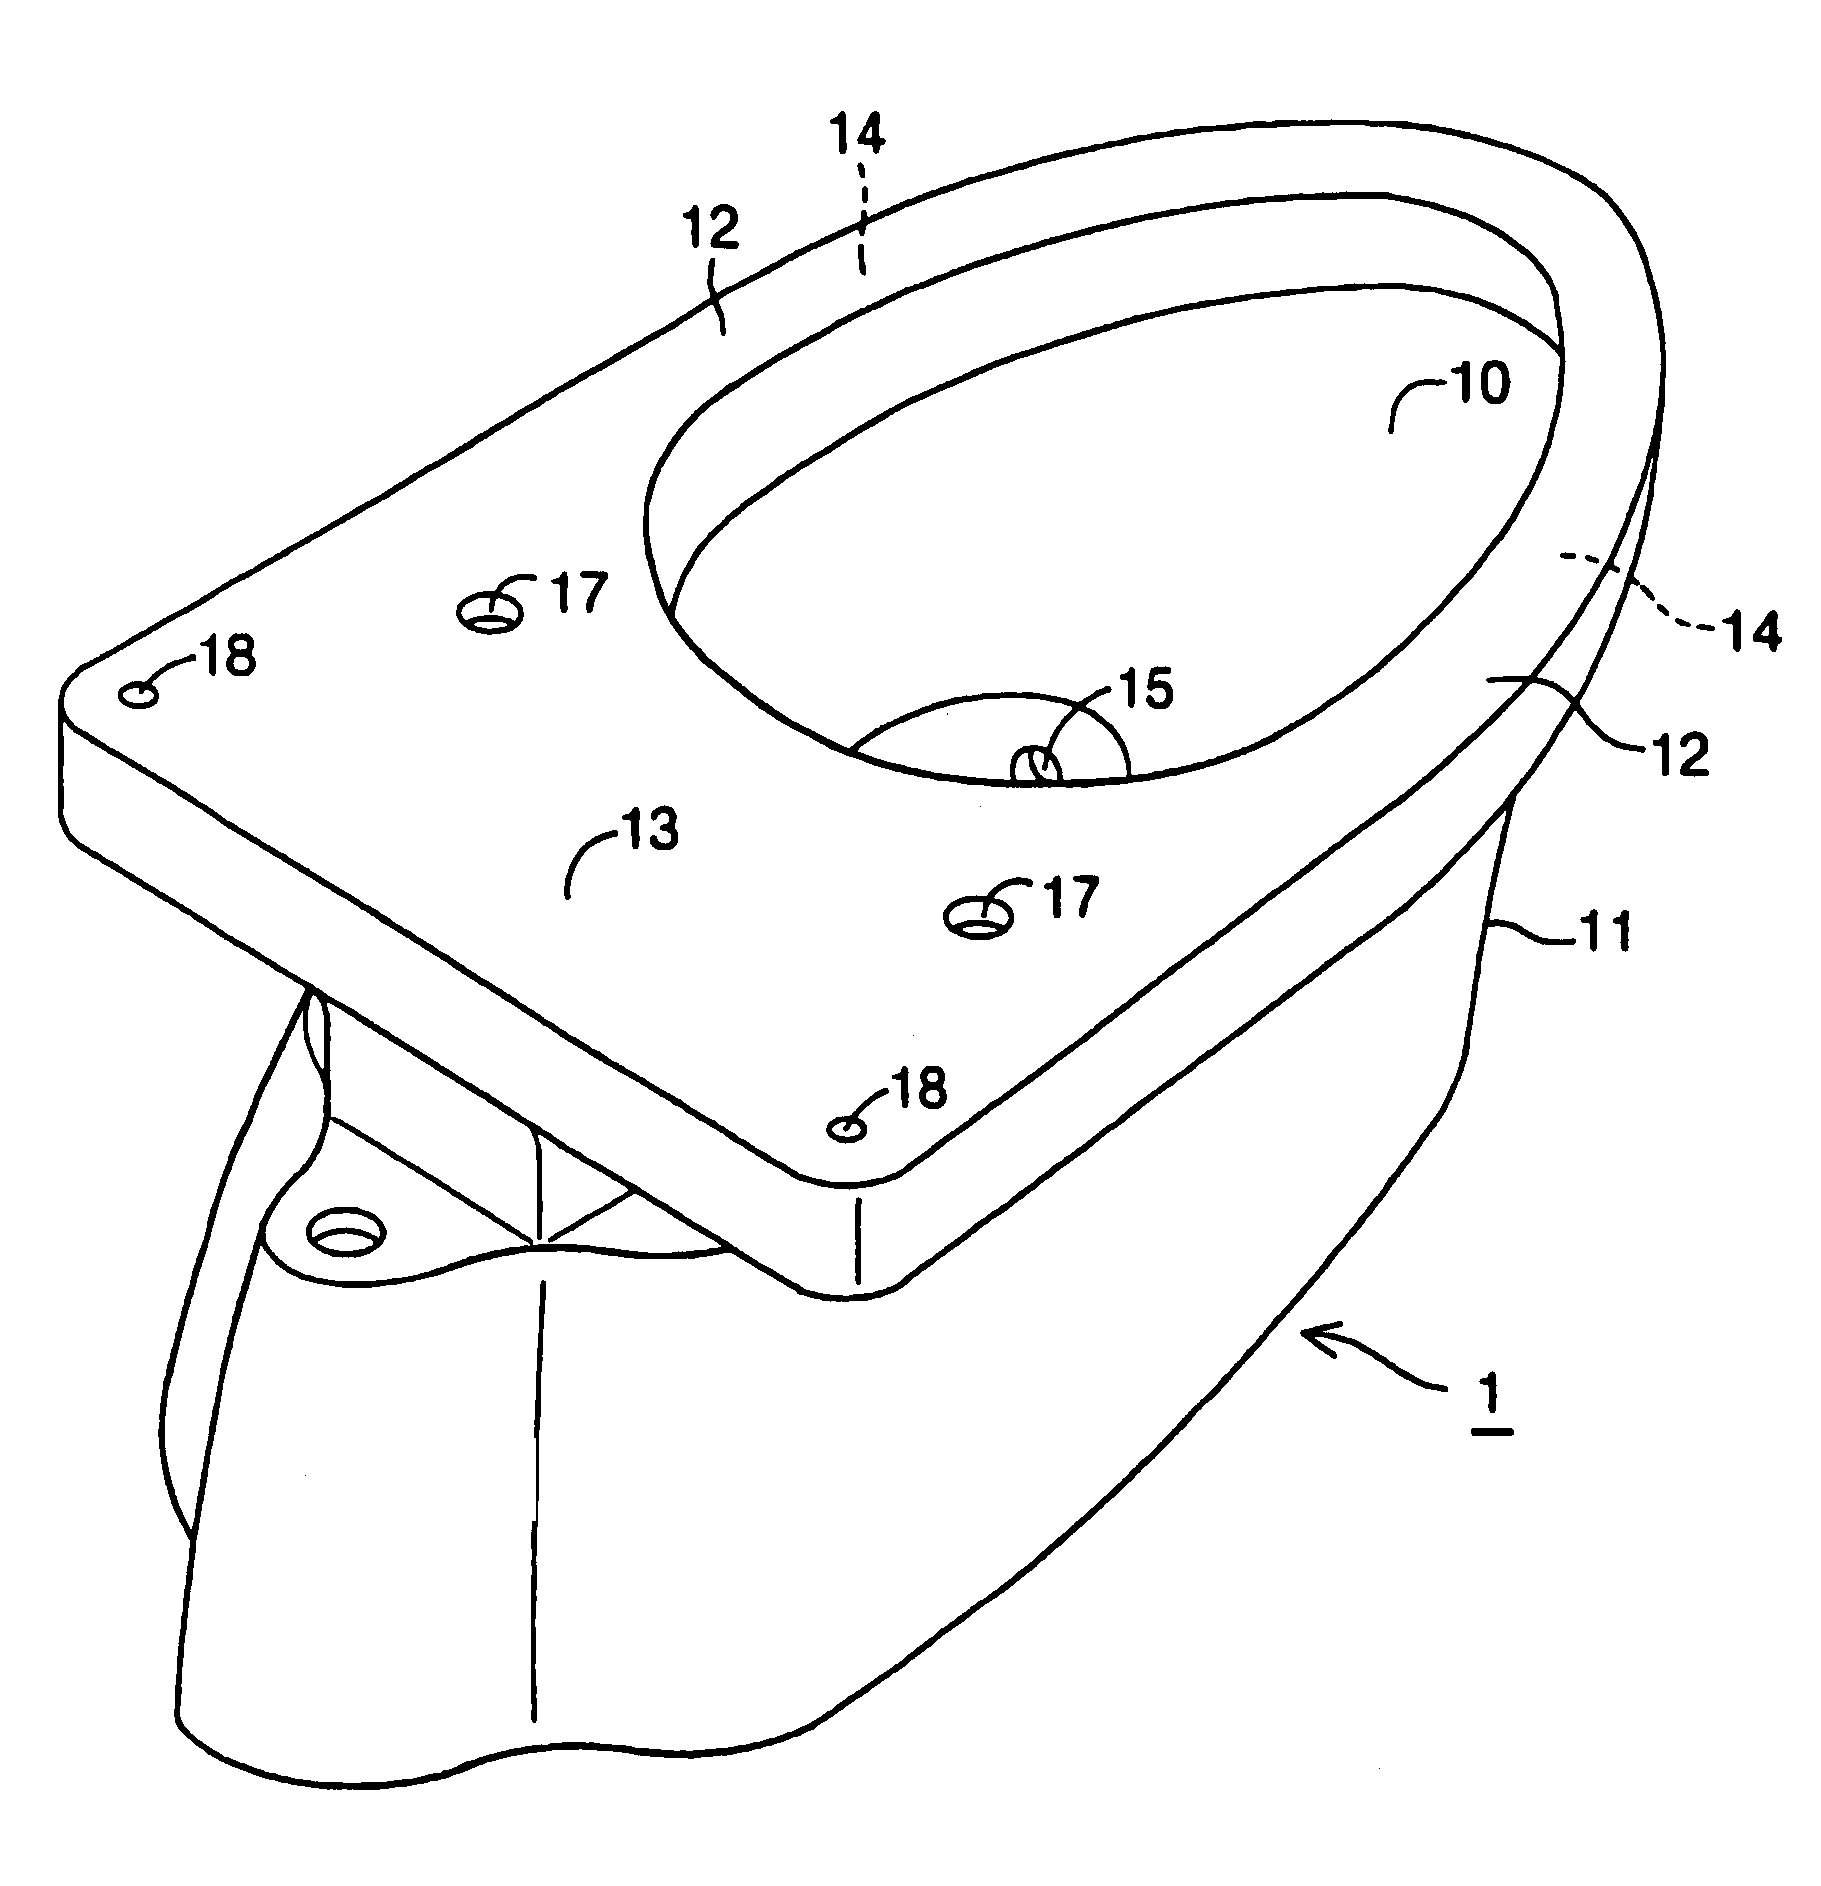 Tankless toilet, western-style flush toilet, part washing device and spud for flush toilet